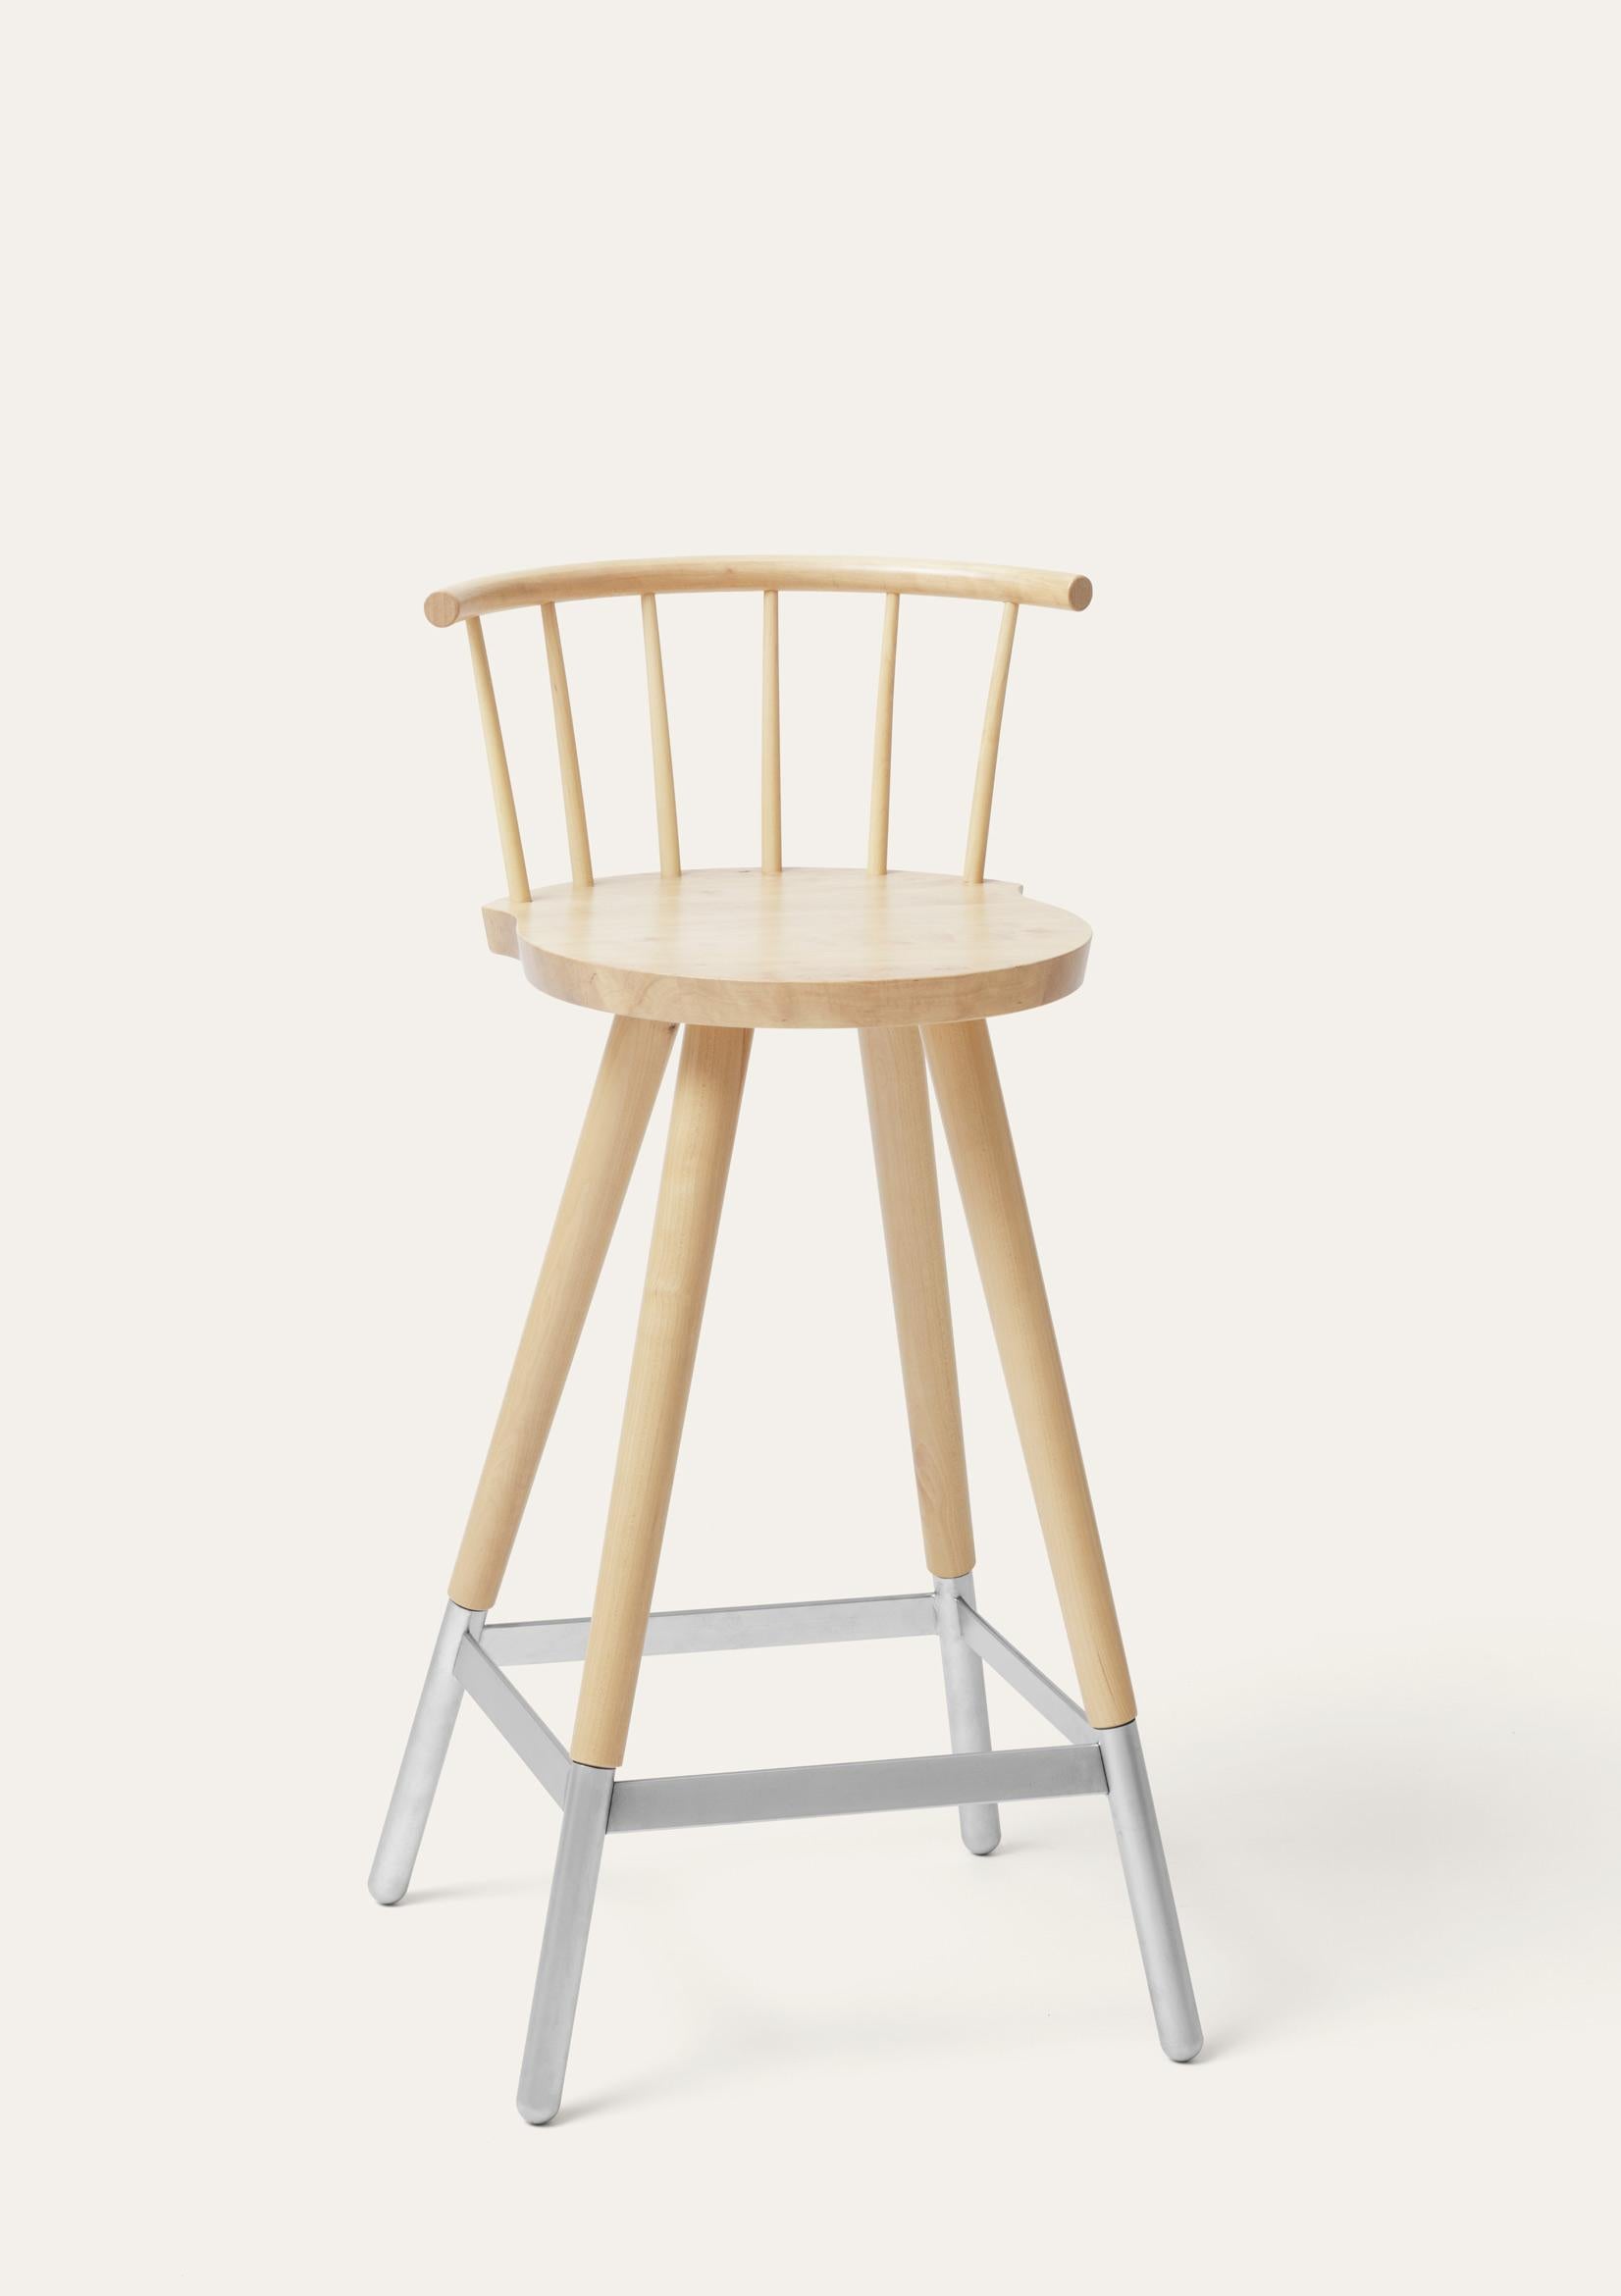 Natural Tupp barstool by Storängen Design
Dimensions: D 41 x W 41 x H 85 x SH 65 cm
Materials: birch wood, nickel plated steel.
Also available in other colors.

Give the bar some character! Tupp is avaliable in two heights, both with and